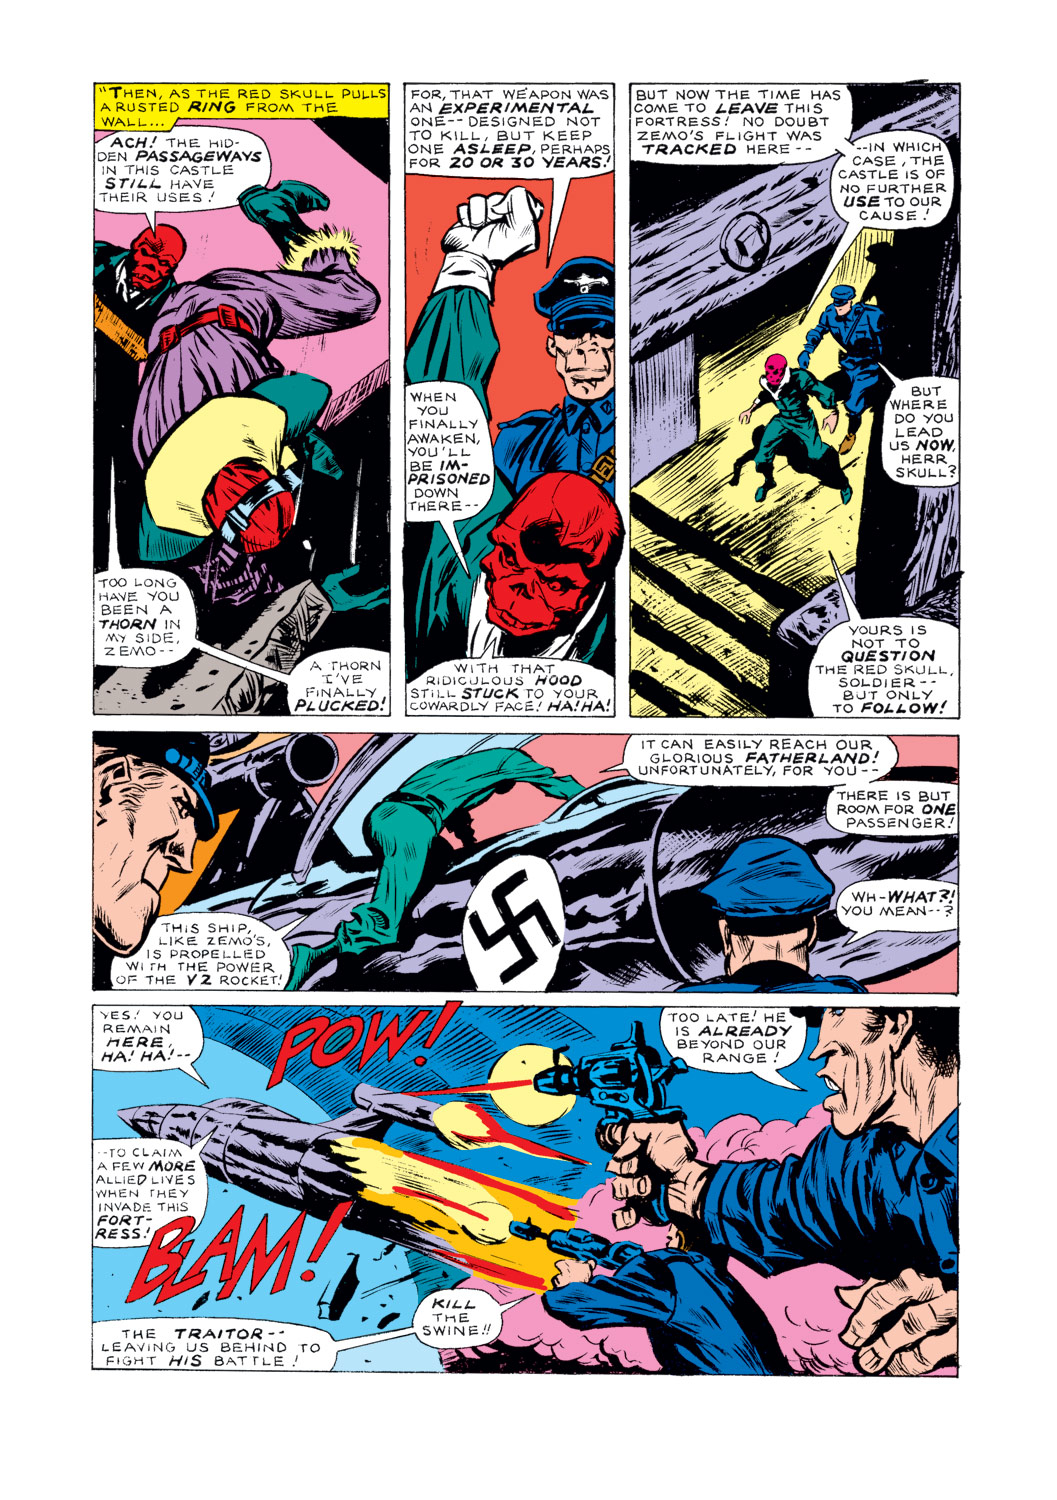 What If? (1977) issue 5 - Captain America hadn't vanished during World War Two - Page 8